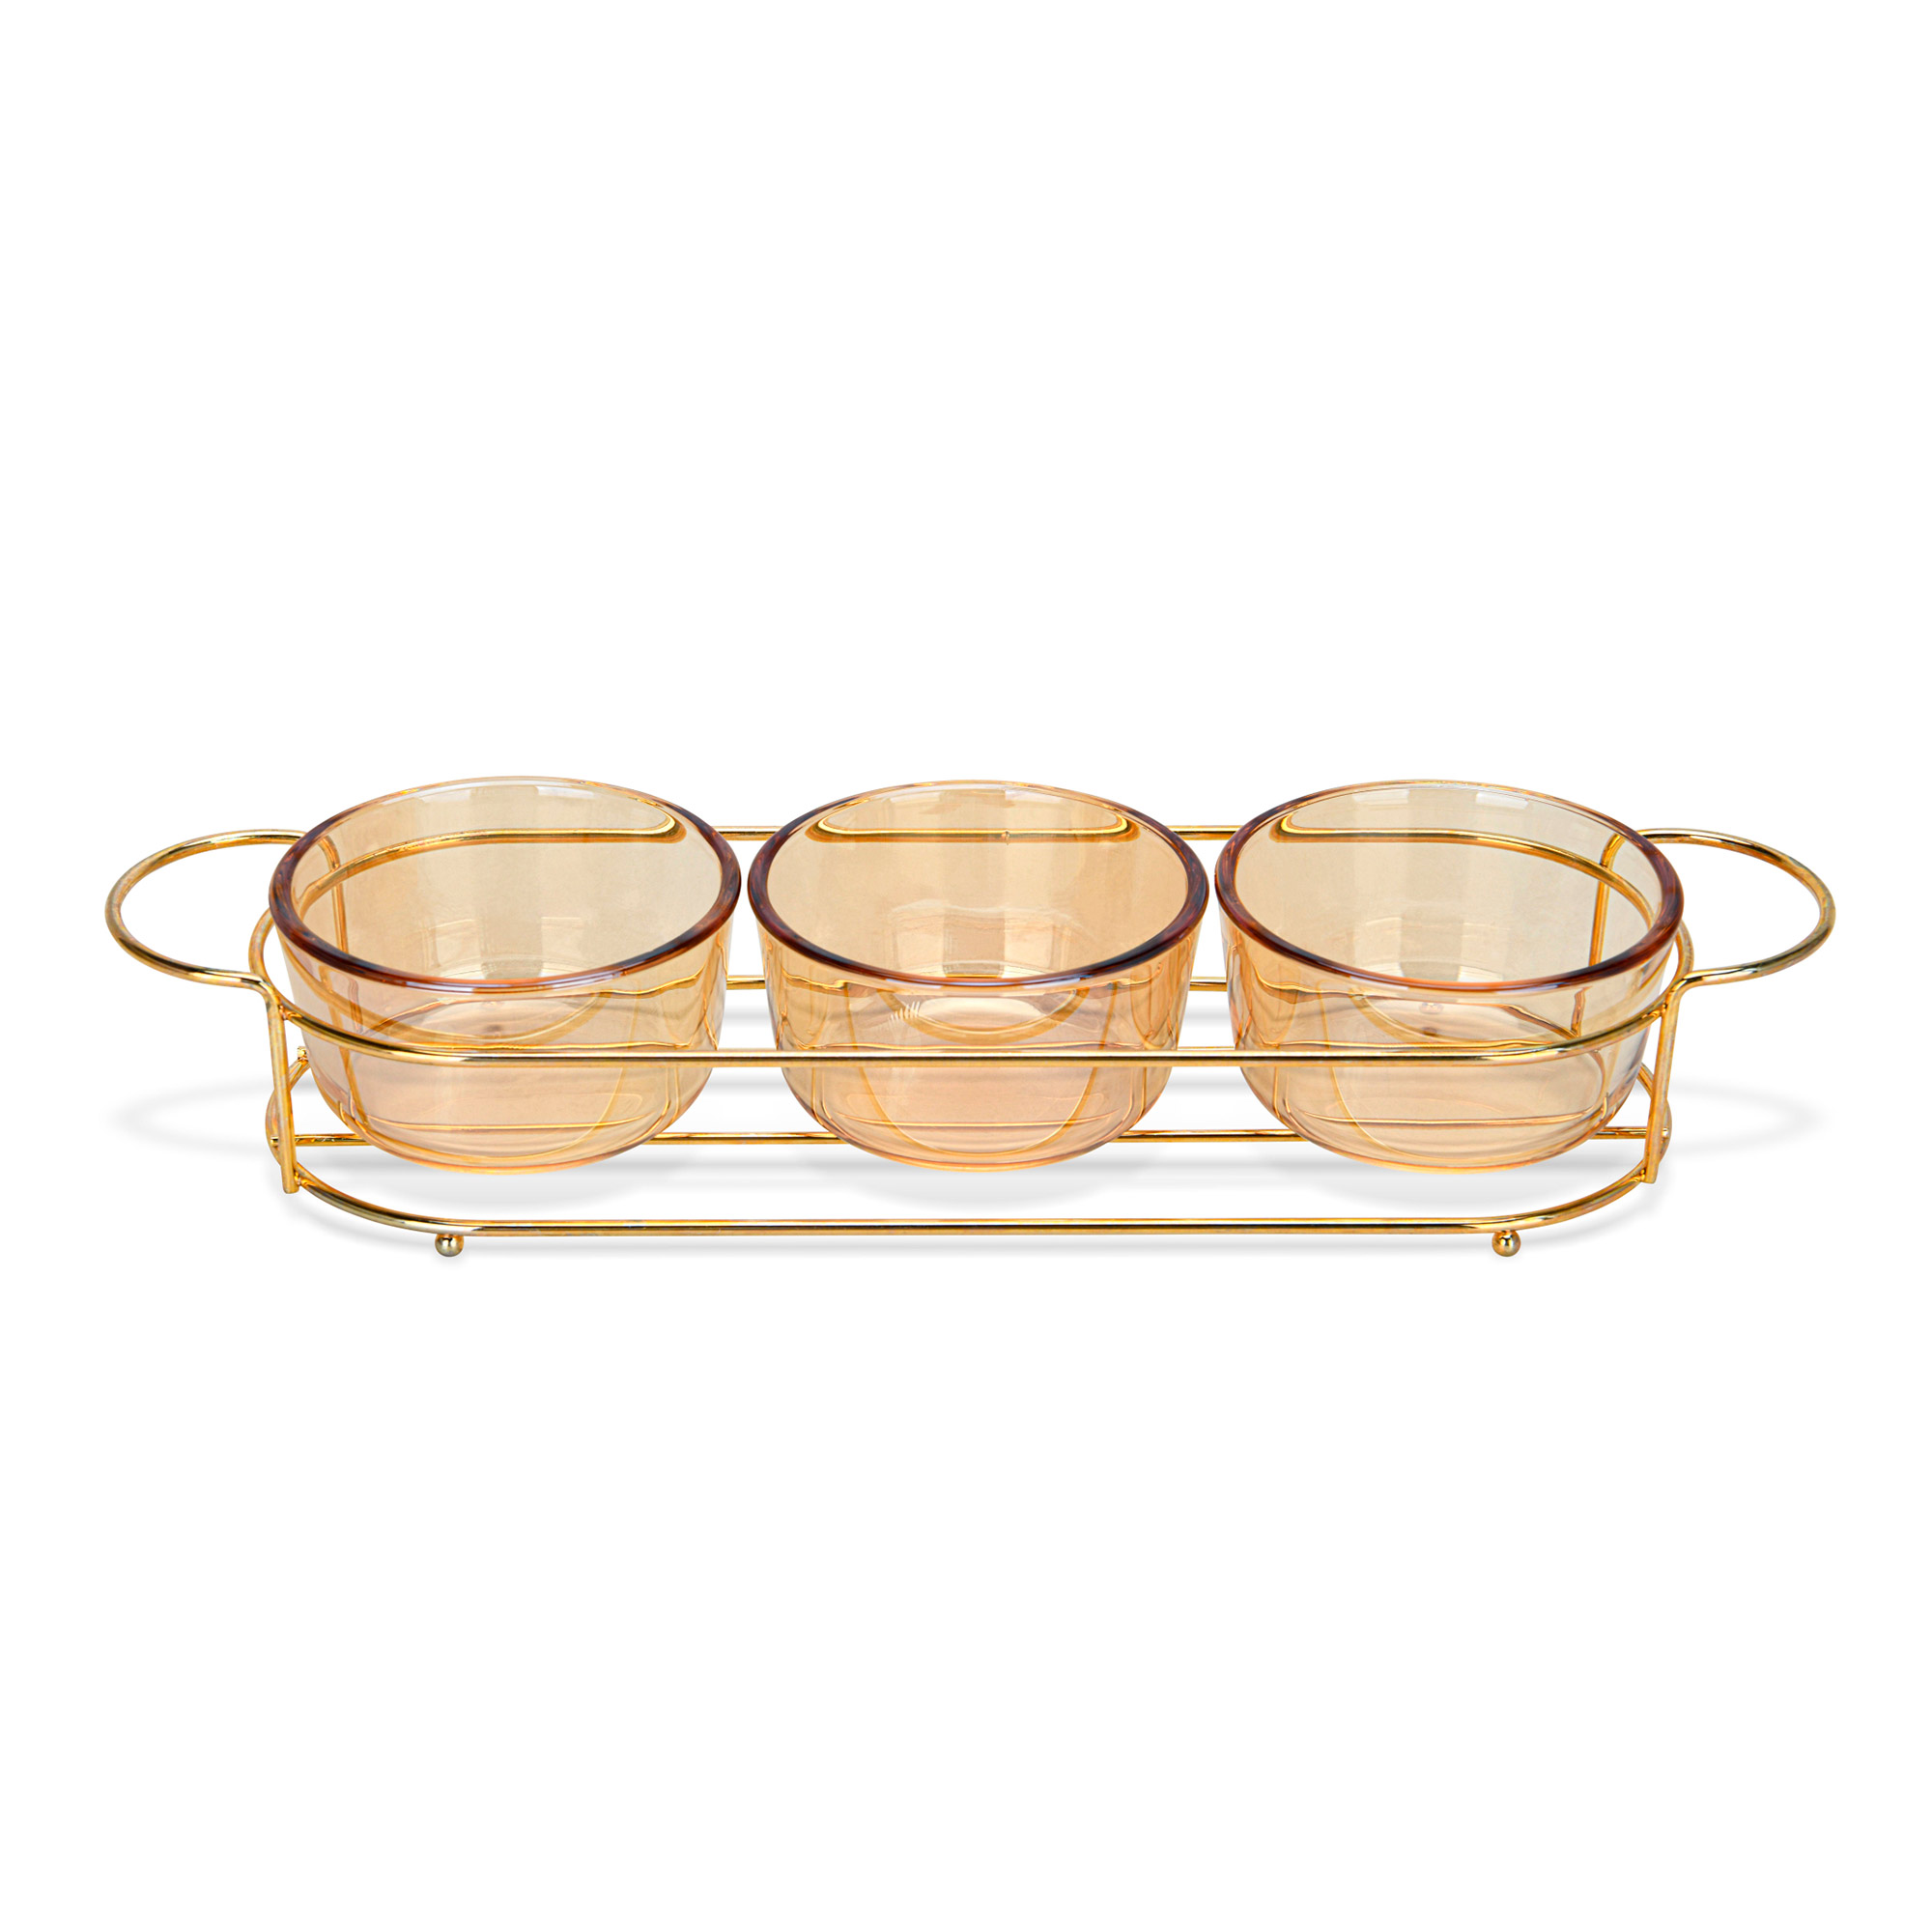 Set of bowls 3 pcs. in a metal stand